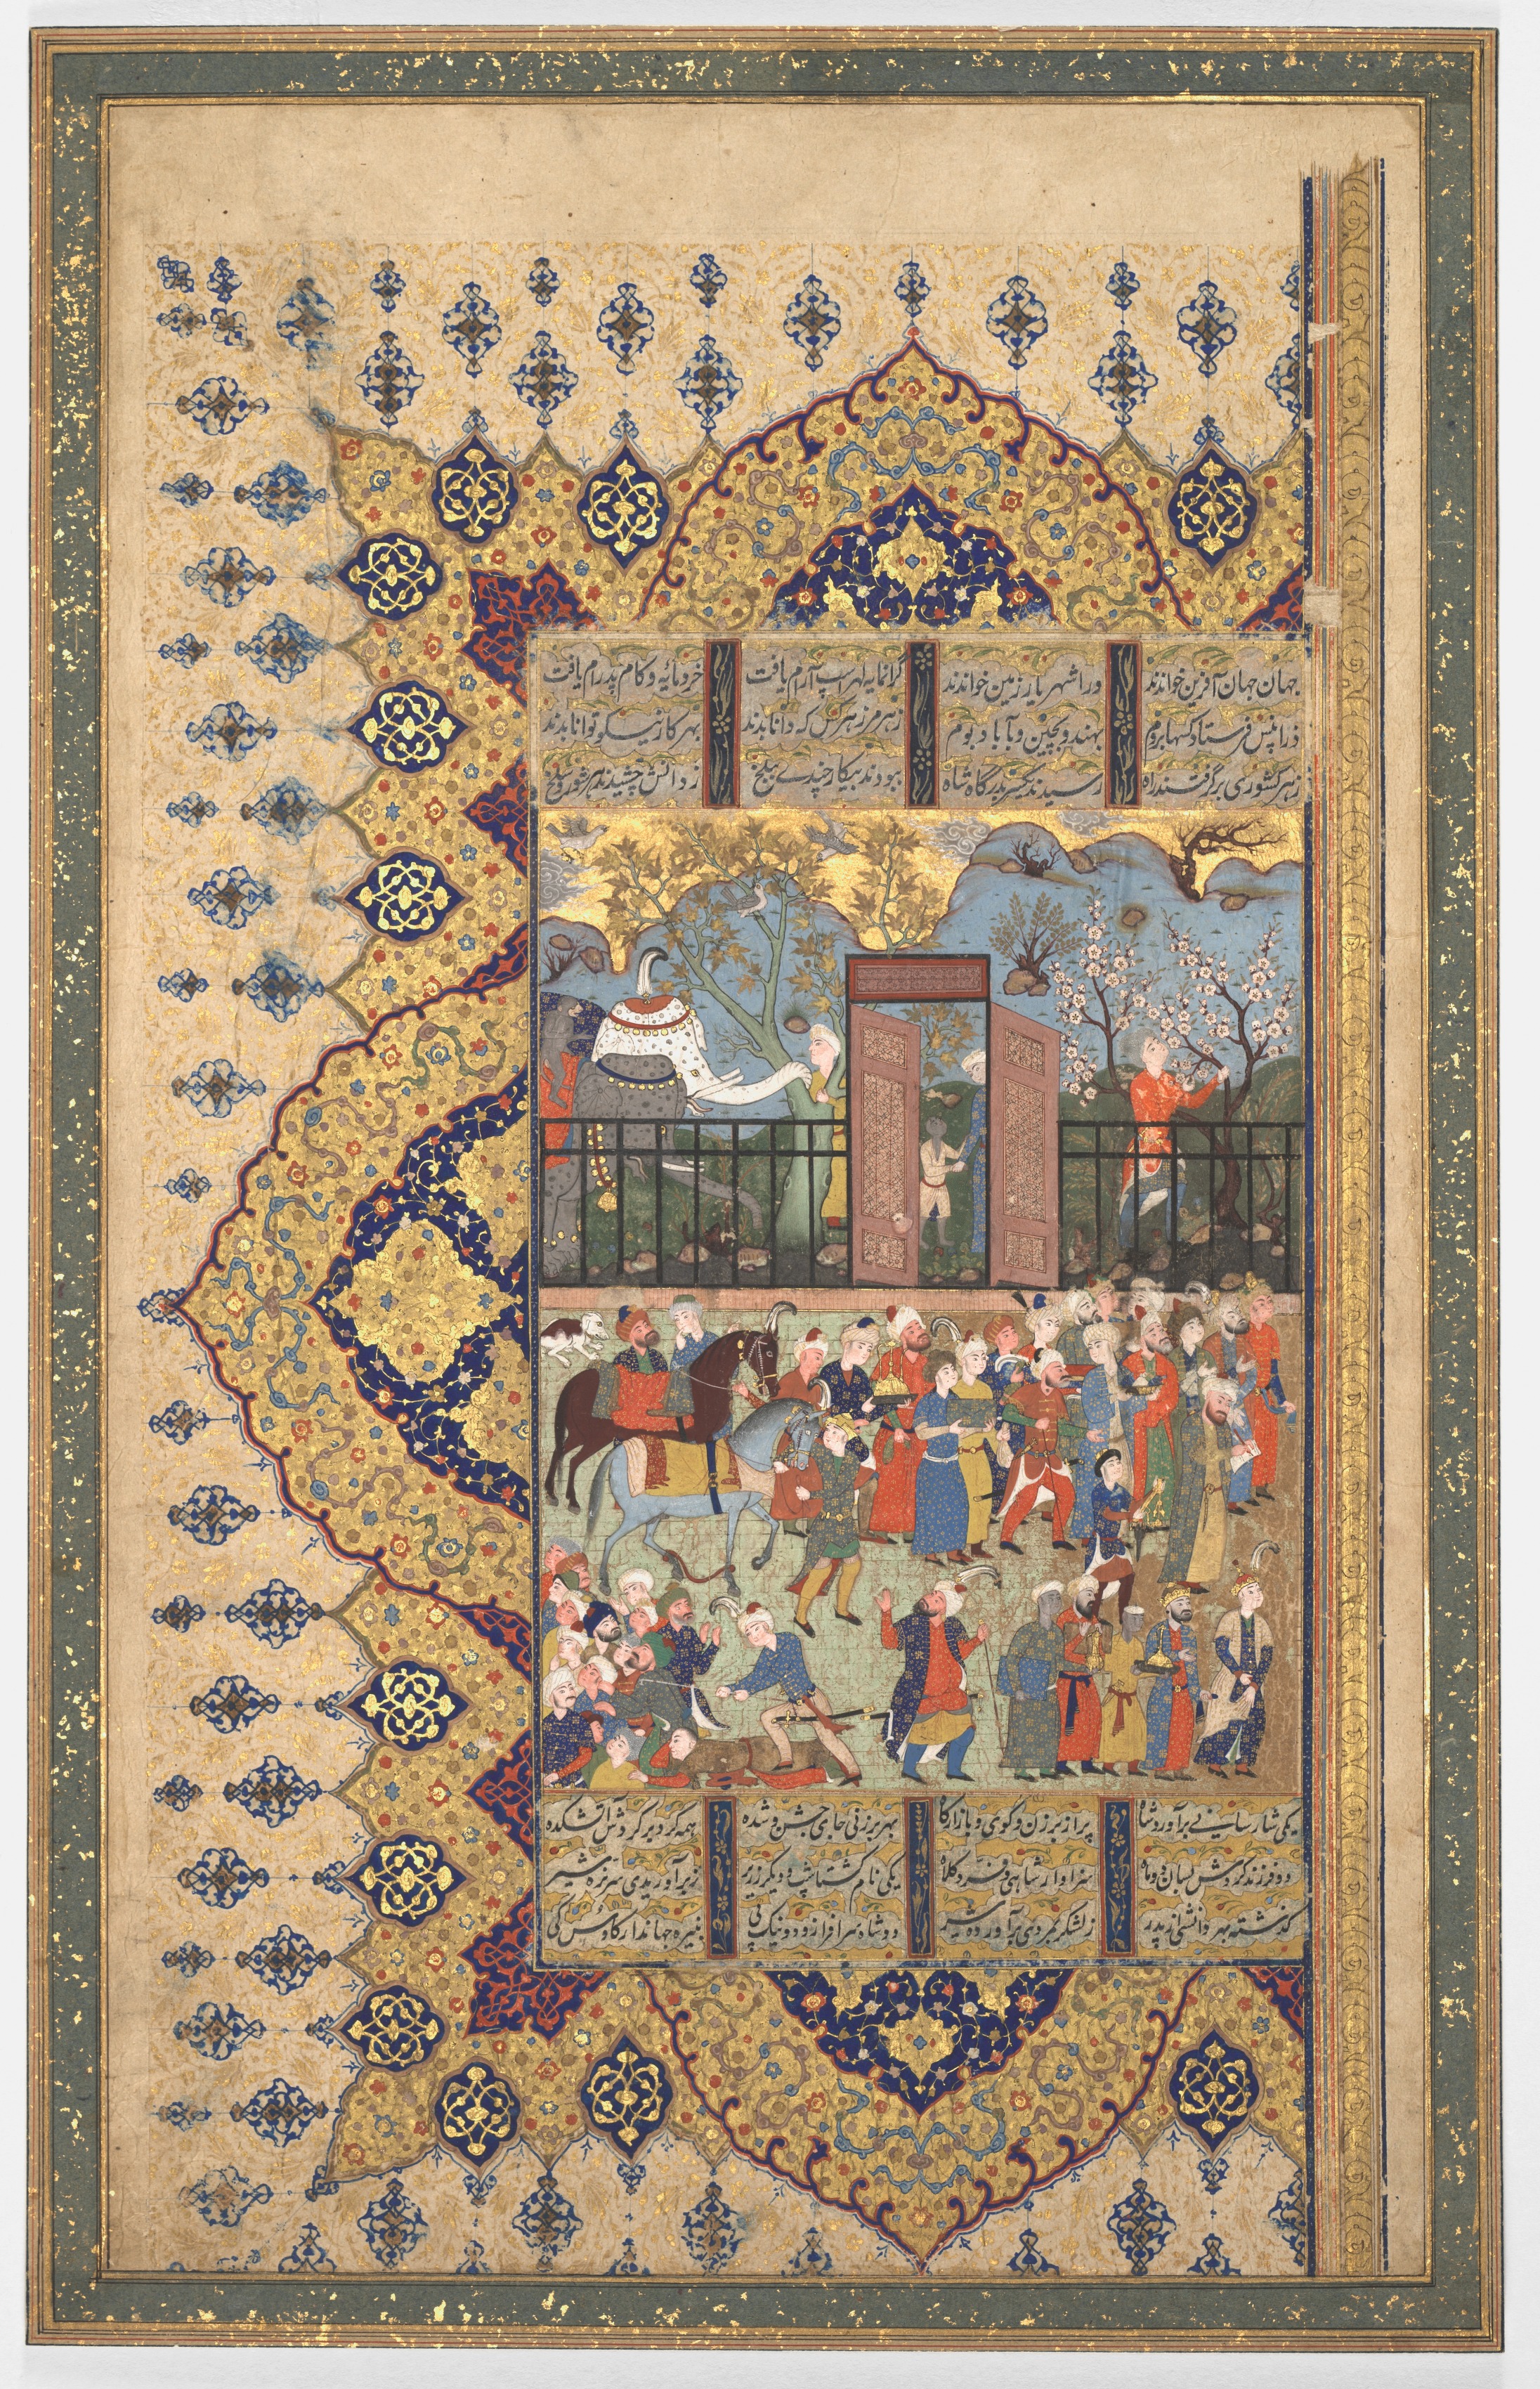 King Luhrasp Ascends the Throne: a Processon Arrives at Court (recto); the Story of King Luhrasp (verso) from a Shahnama (Book of Kings) of Firdausi (940-1019 or 1025)